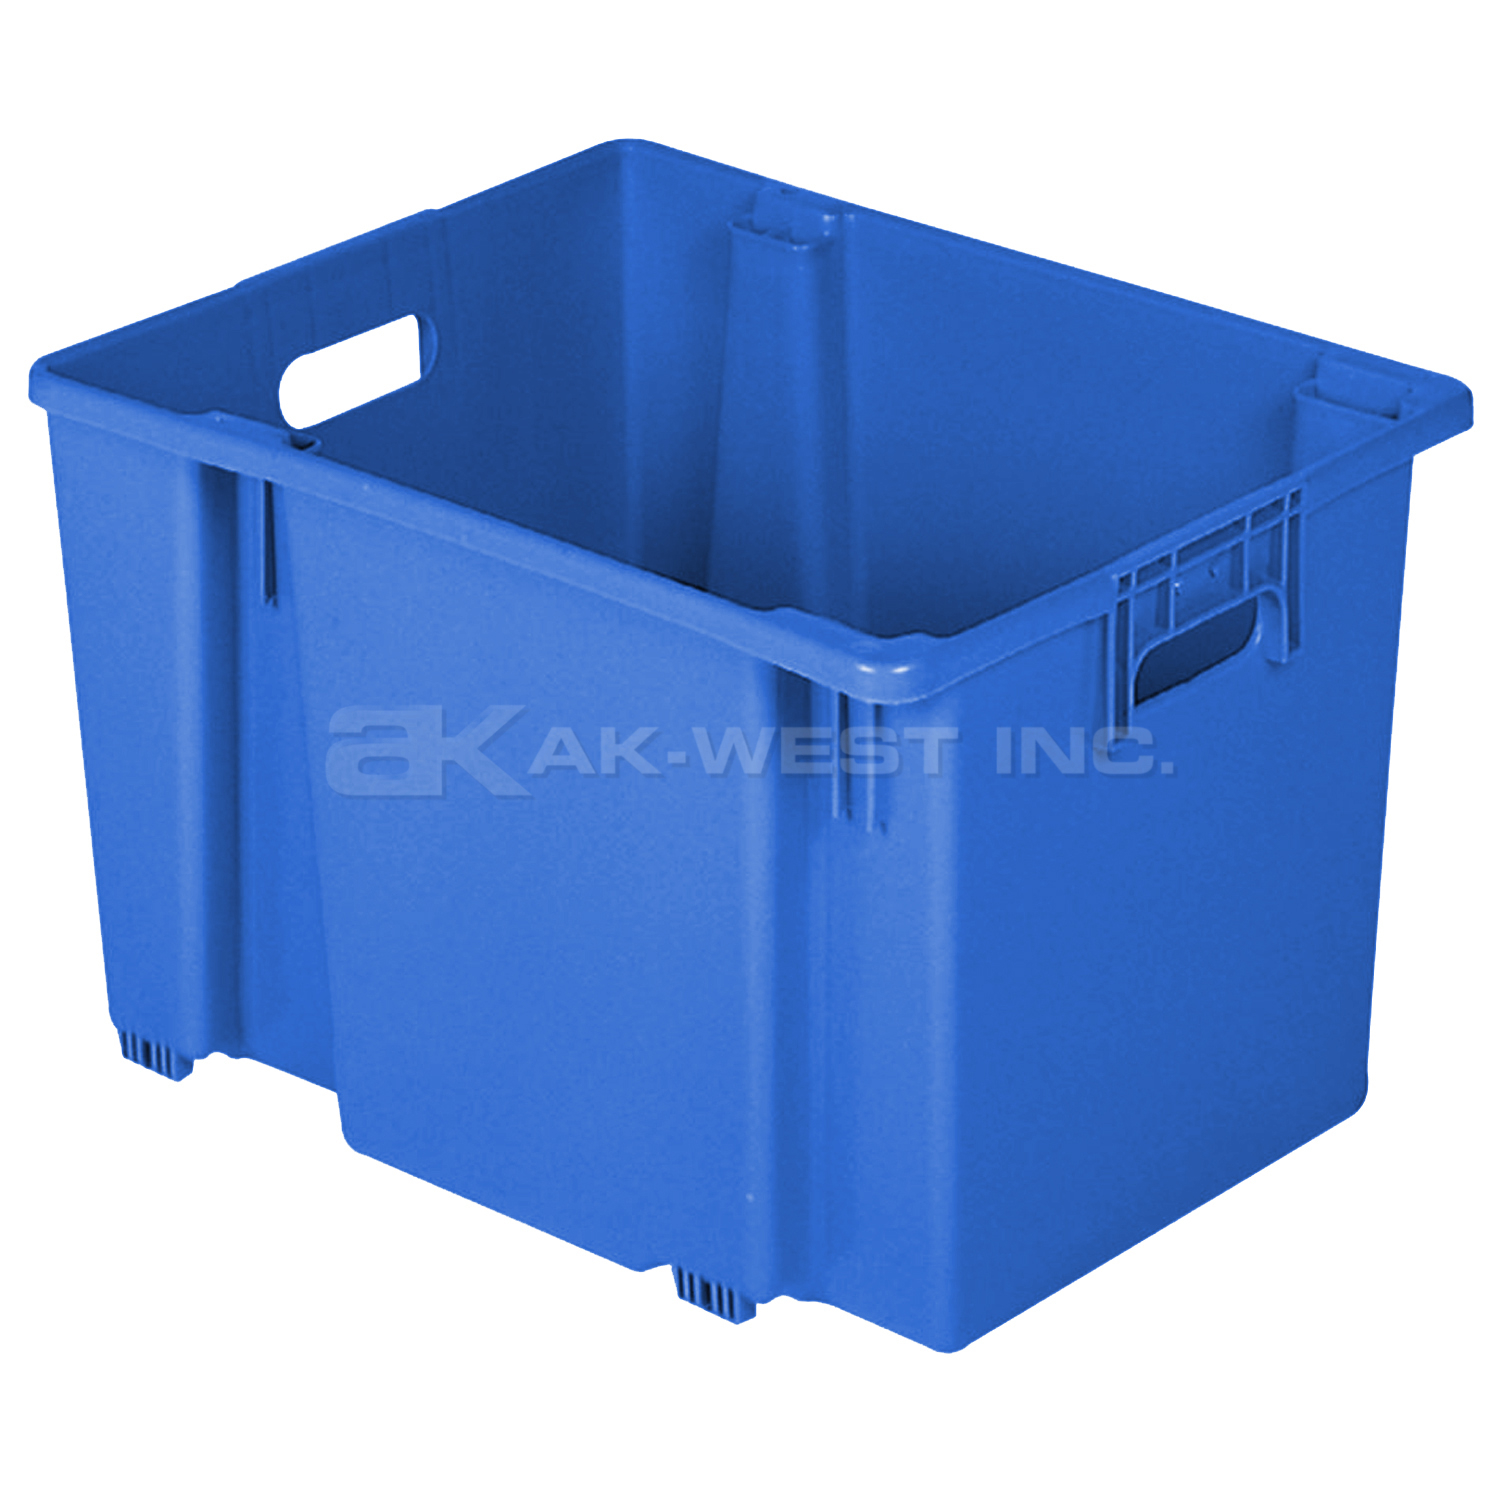 Blue, 20" x 16" x 12", Solid Stack and Nest Container, (Alt. M/N: 18-610)